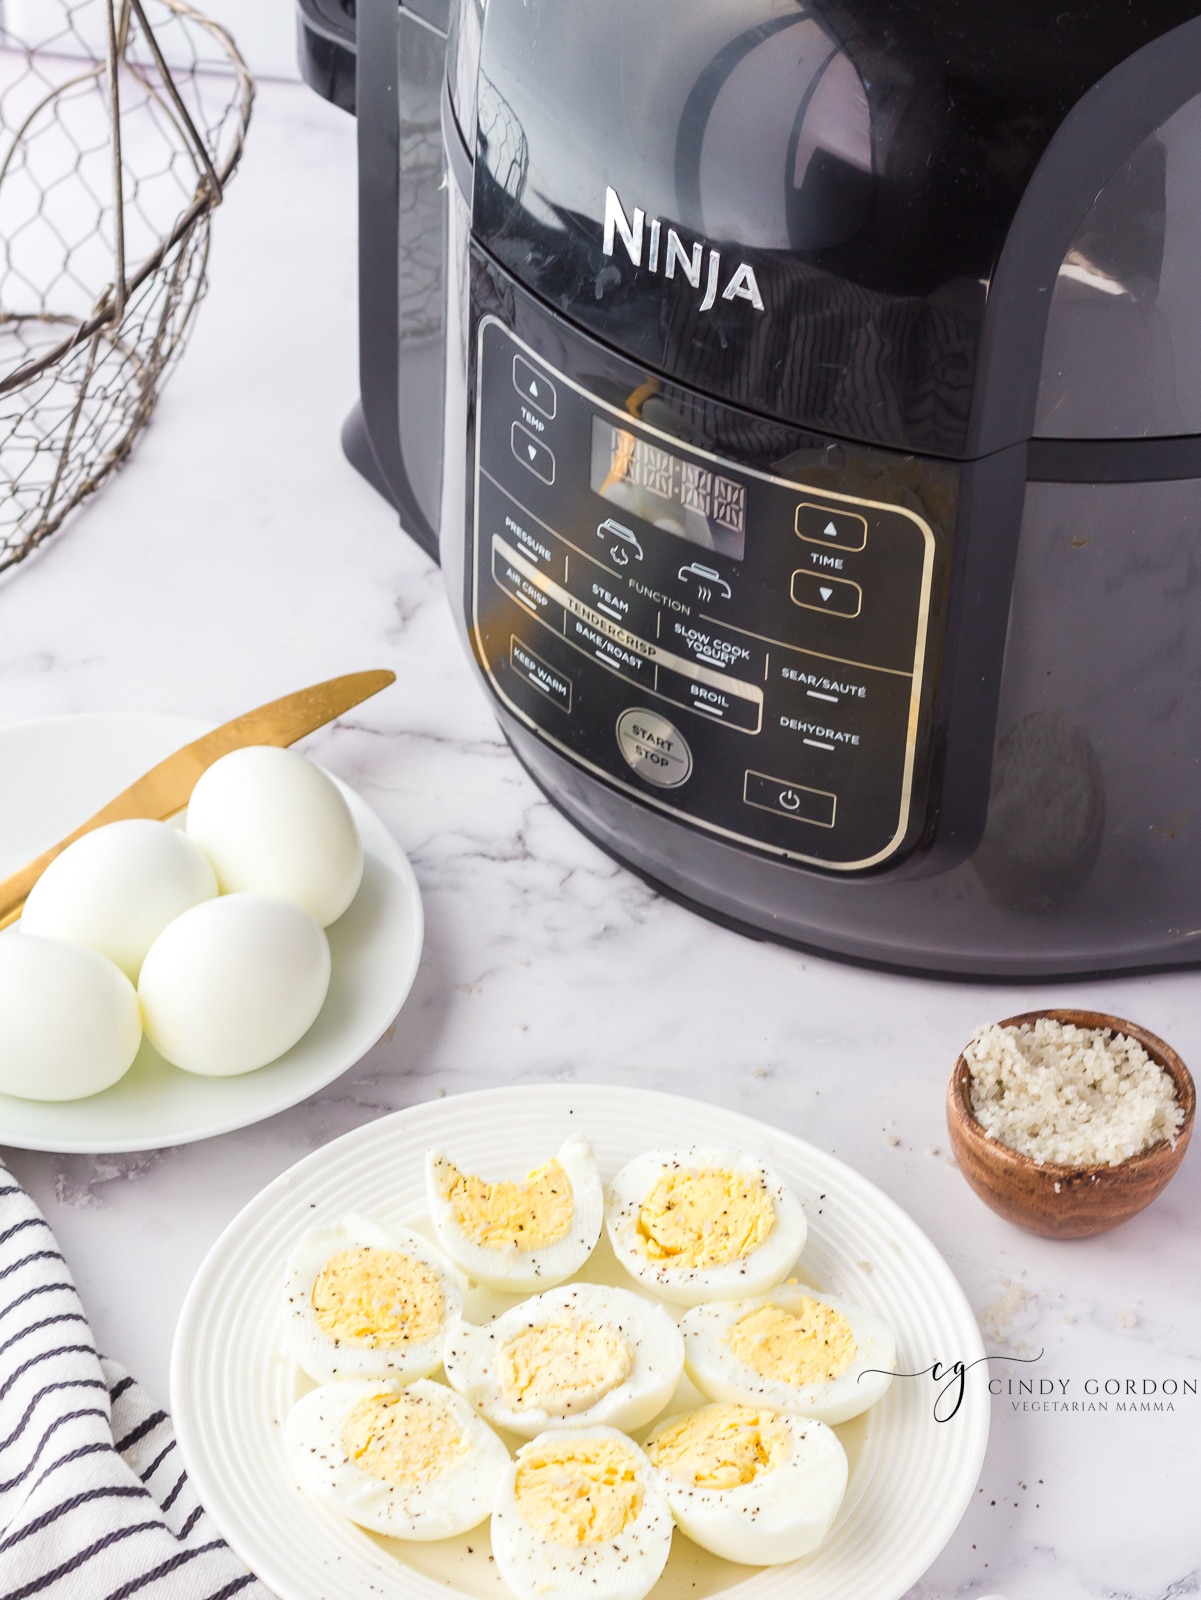 A ninja foodi multicooker next to two plates of hard boiled eggs. one plate has halved eggs with salt and pepper and one has whole eggs. A bowl of coarse salt is also on the counter. 